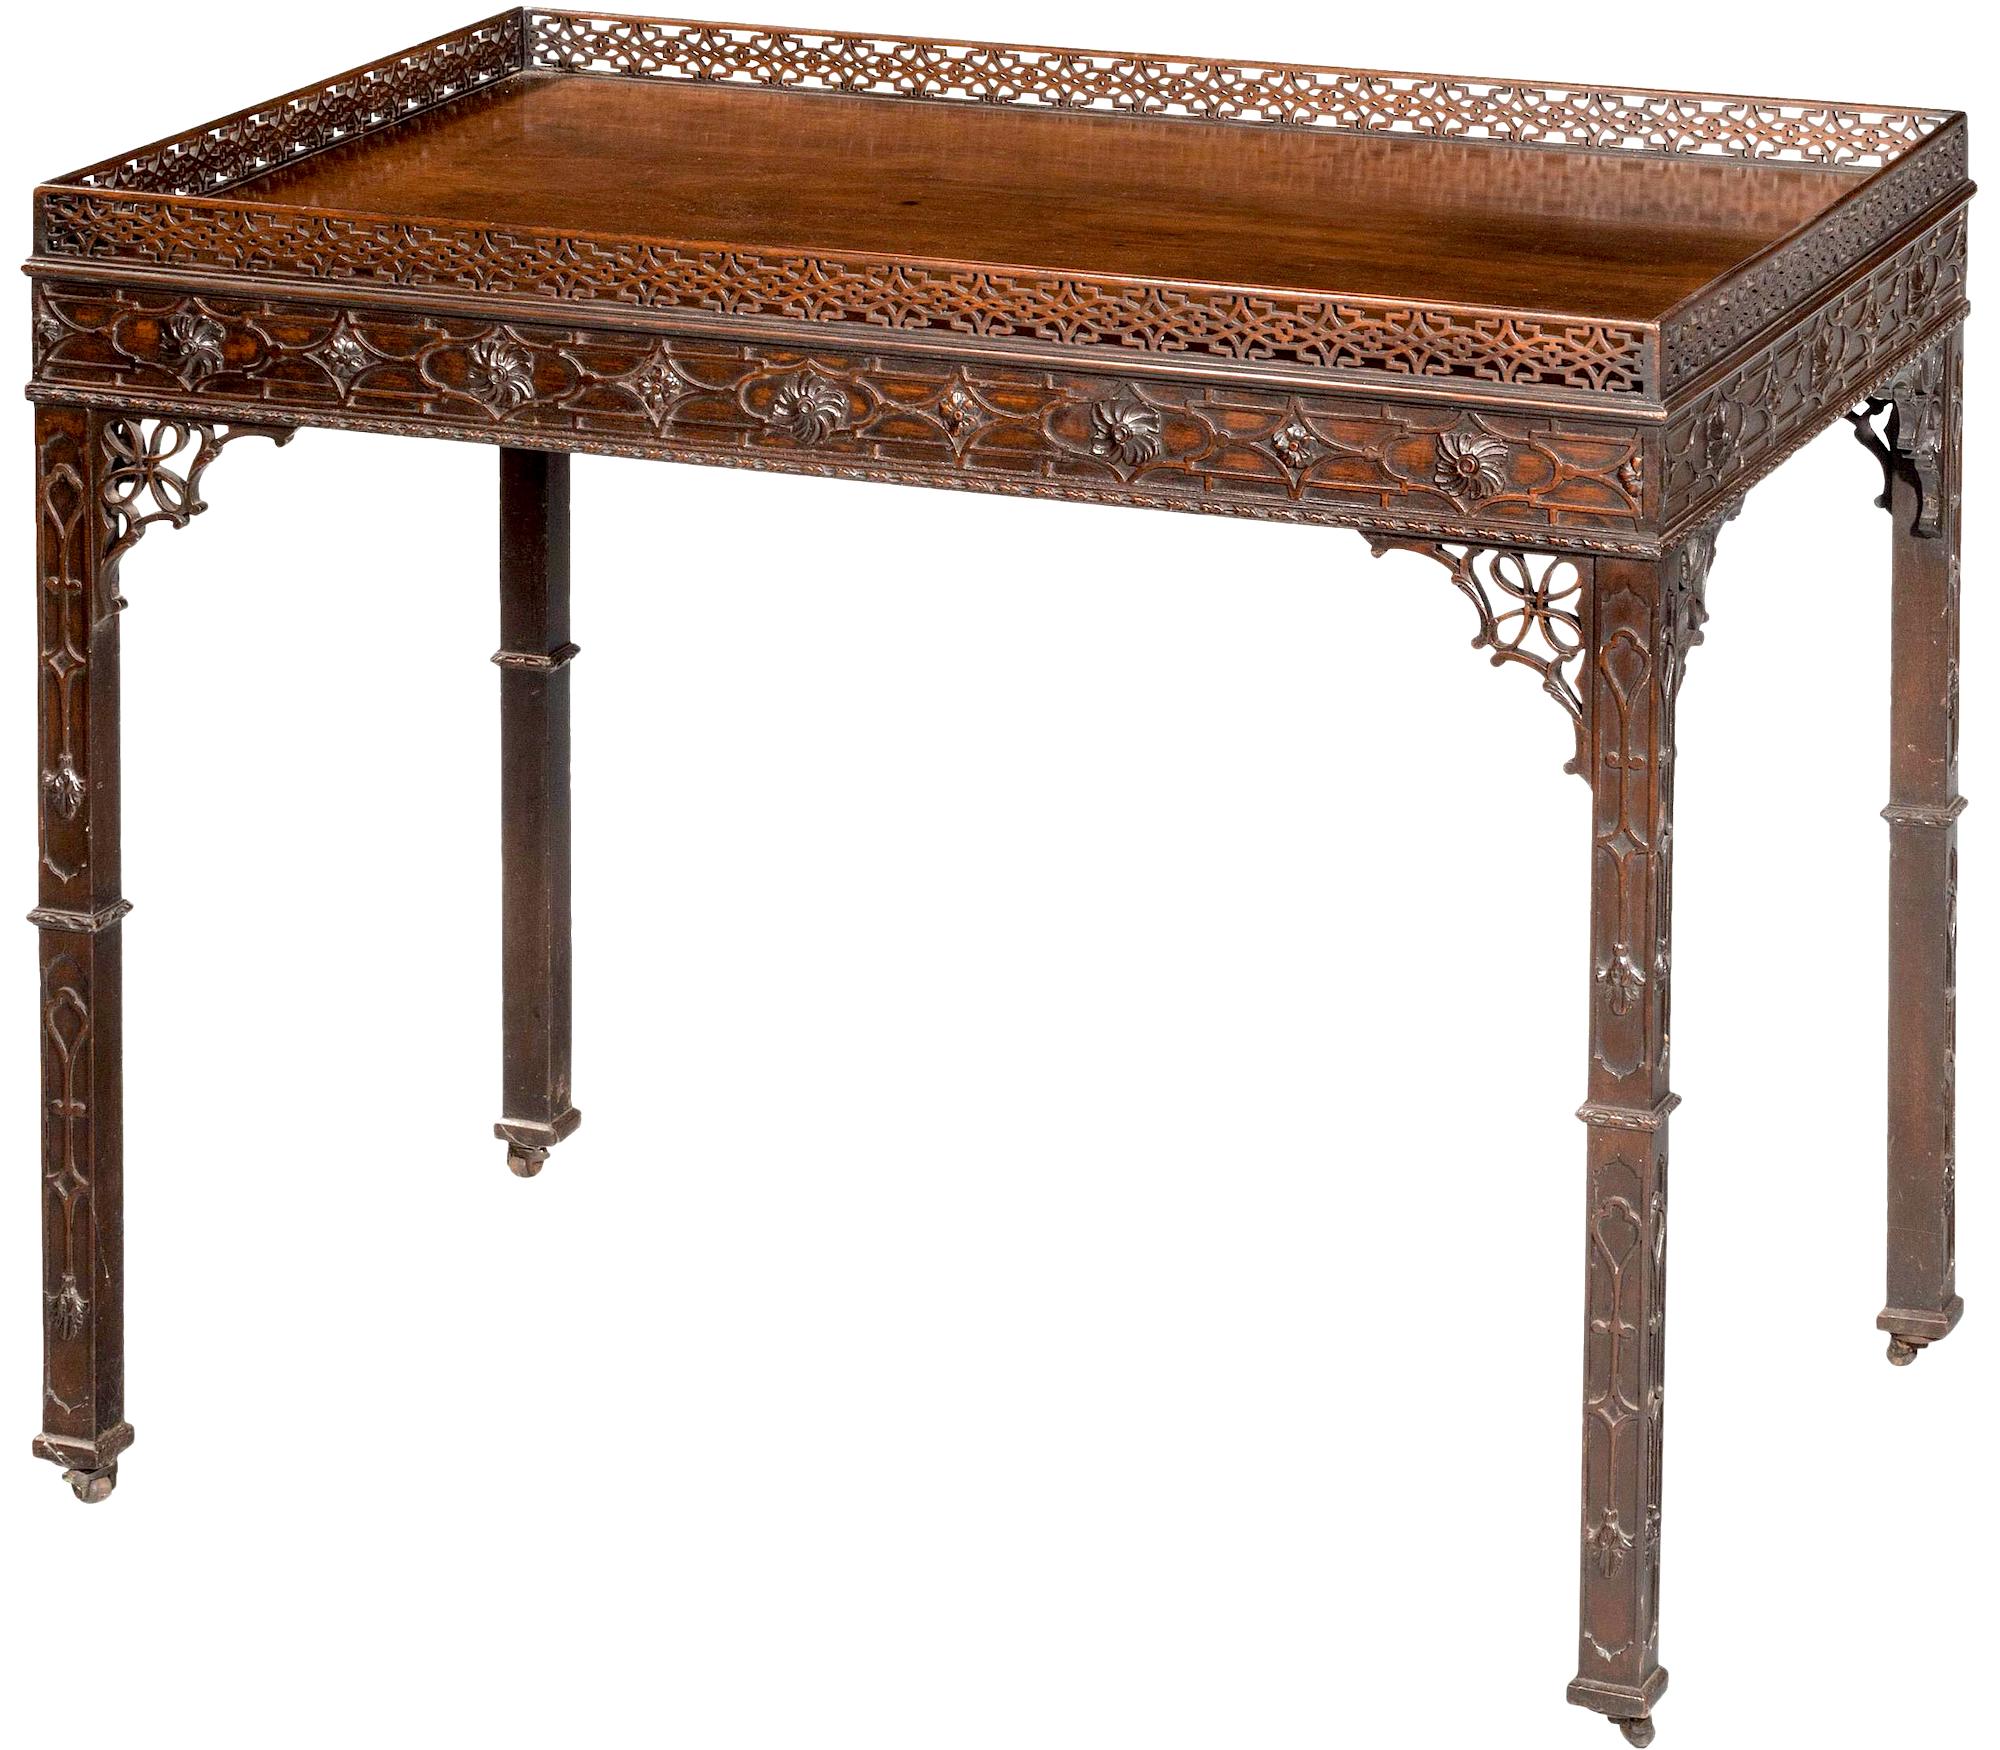 Thomas Chippendale 18th c. Chinese Chippendale fretwork server